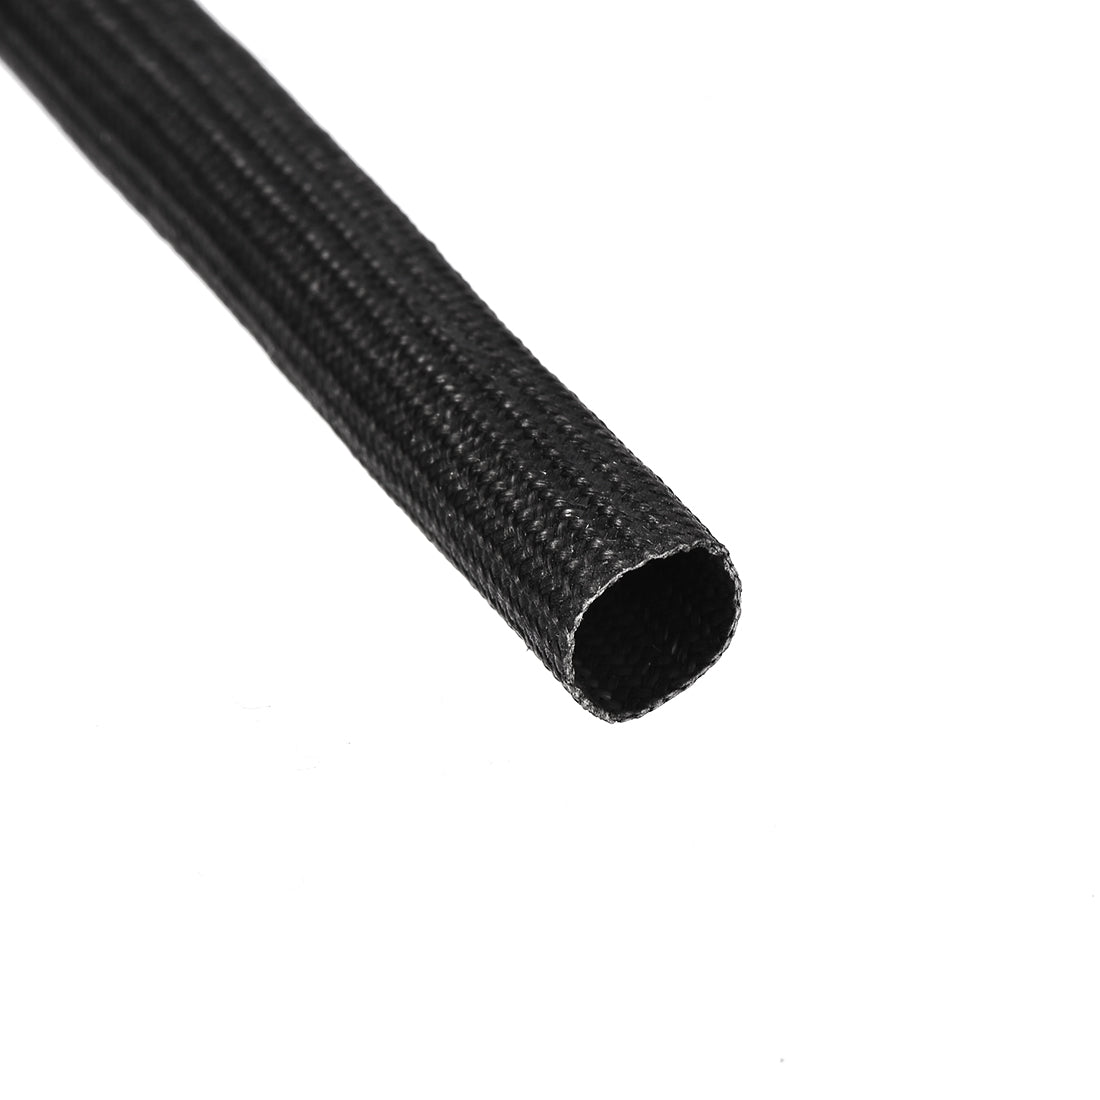 uxcell Uxcell Insulation Cable Protector,16.4Ft-8mm High TEMP Silicone Fiberglass Sleeve Black